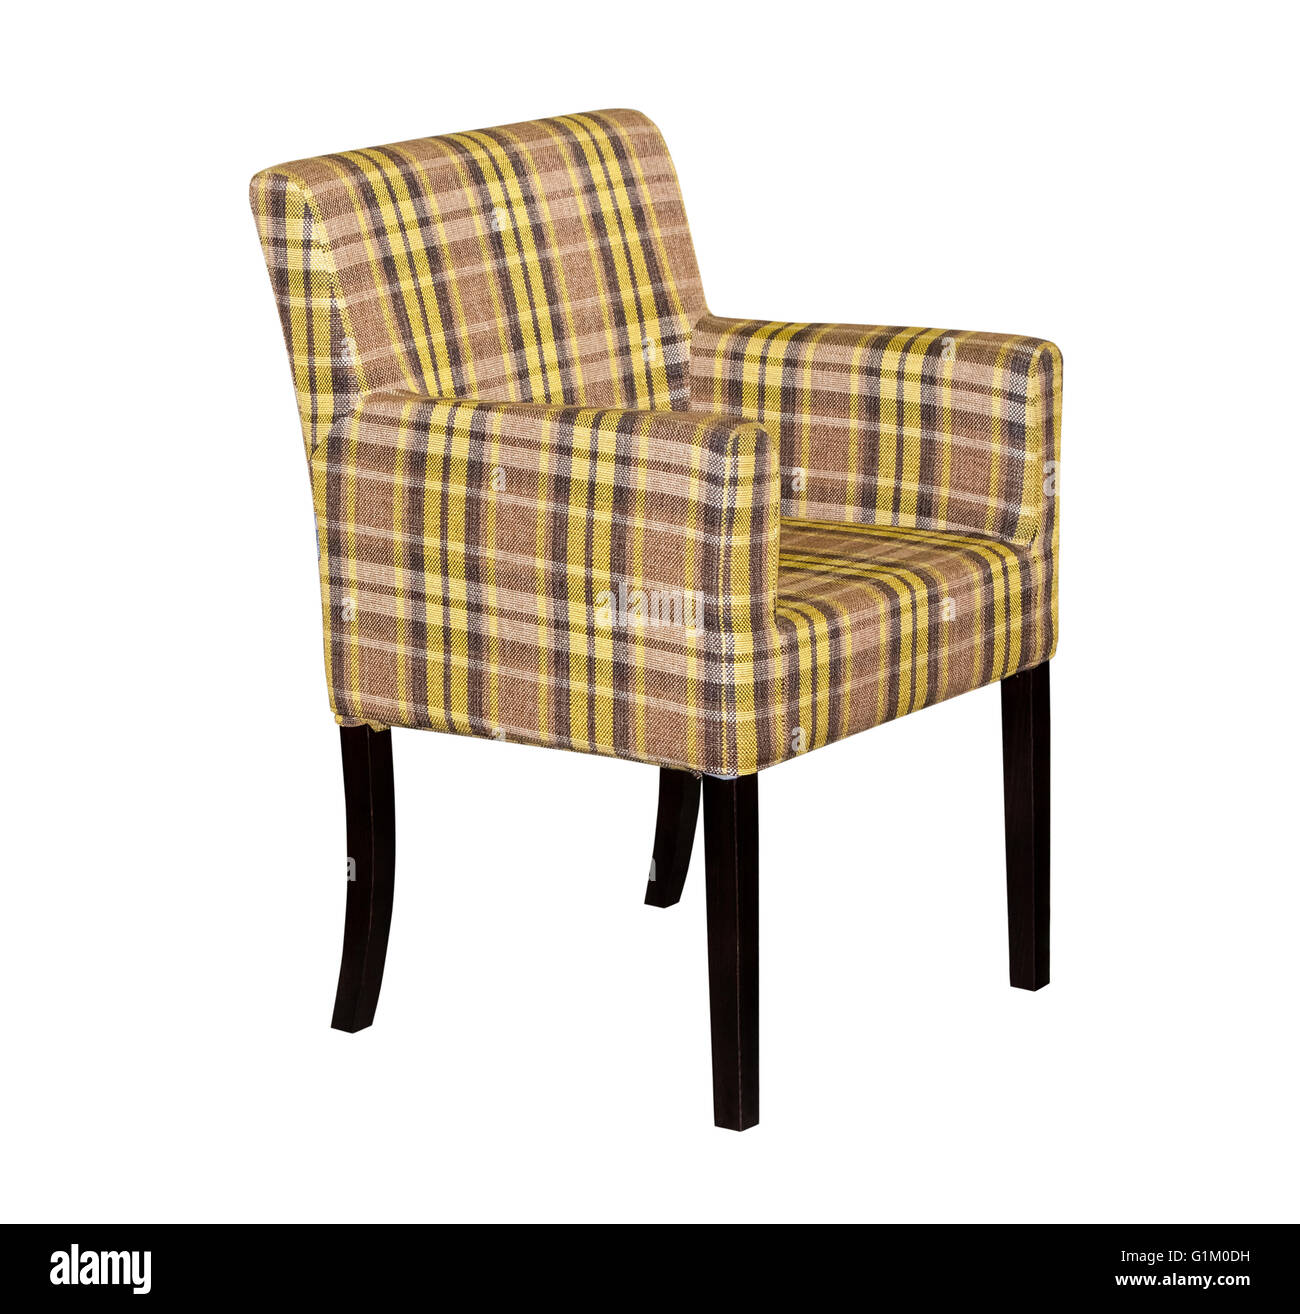 Brown textile modern chair isolated Stock Photo